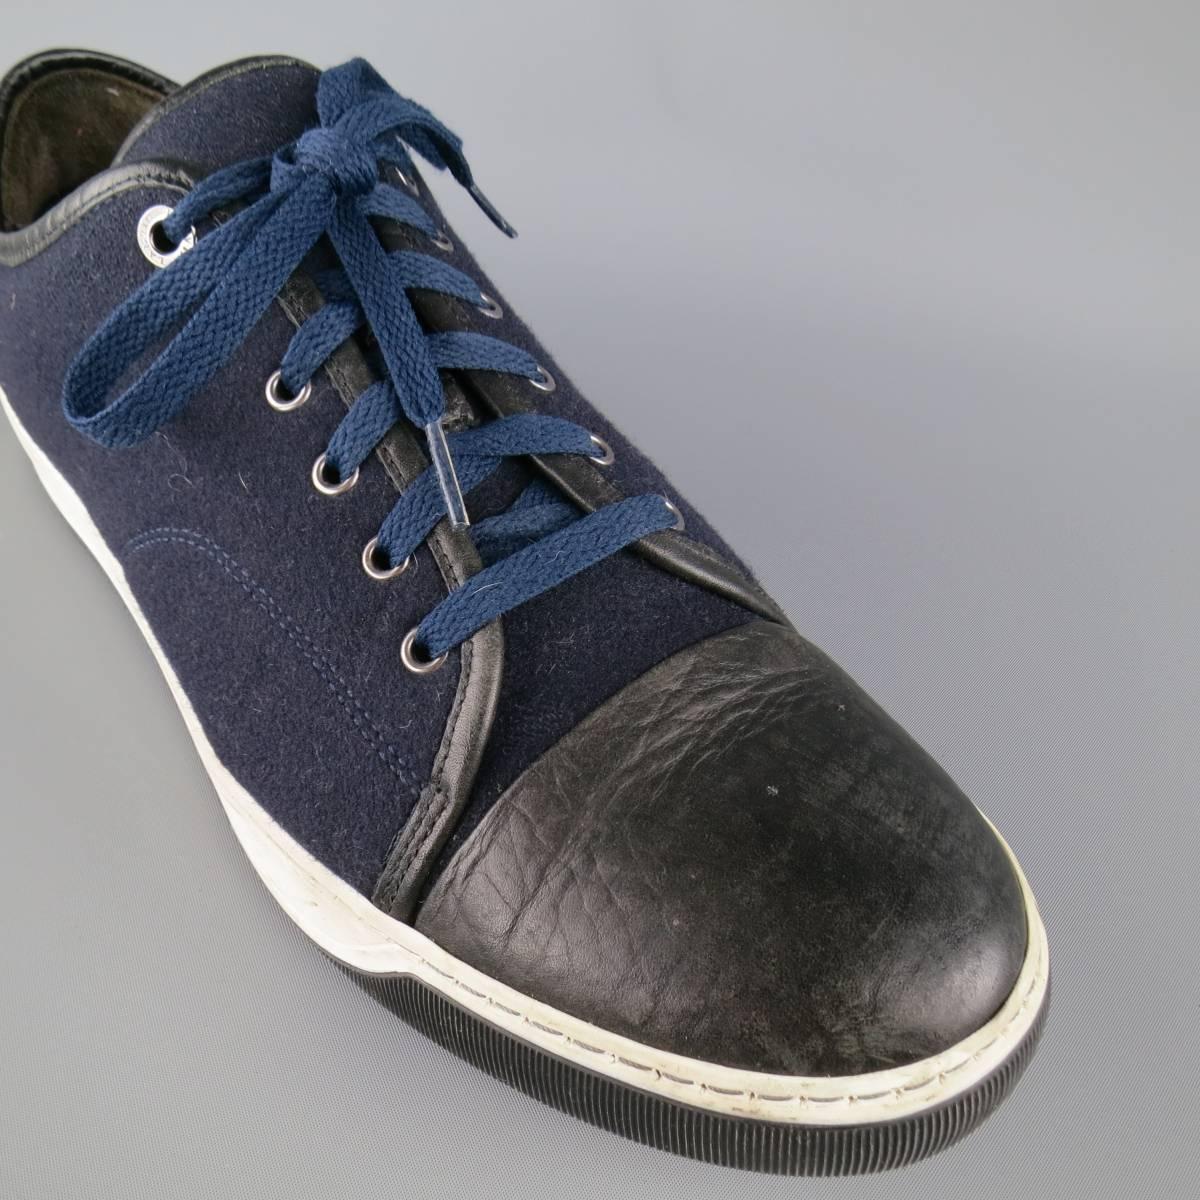 LANVIN sneakers come in a deep navy blue wool felt and feature black leather piping, an embossed black leather cap toe, and black and white rubber sole. Made in Portugal.
 
Good Pre-Owned Condition.
Marked: UK 11
 
Outsole: 12.5 x 4.5 in.
